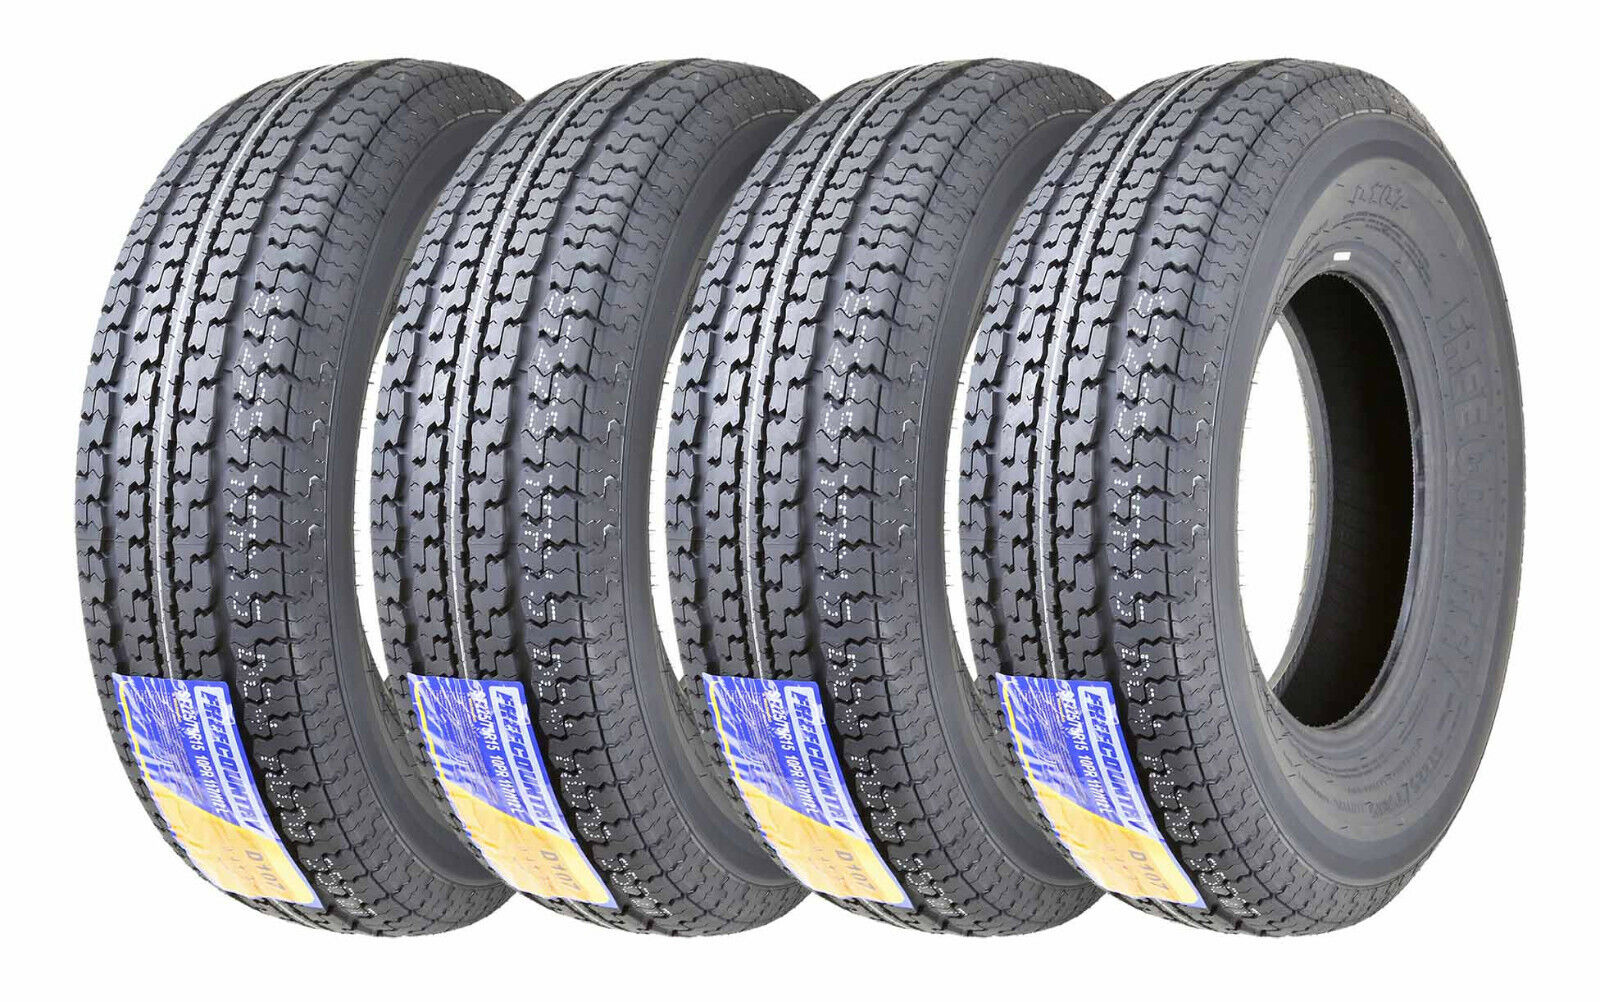 Set 4 FREE COUNTRY ST225/75R15 Trailer Tires 10PR 225 75 15 w/Side Scuff Guard